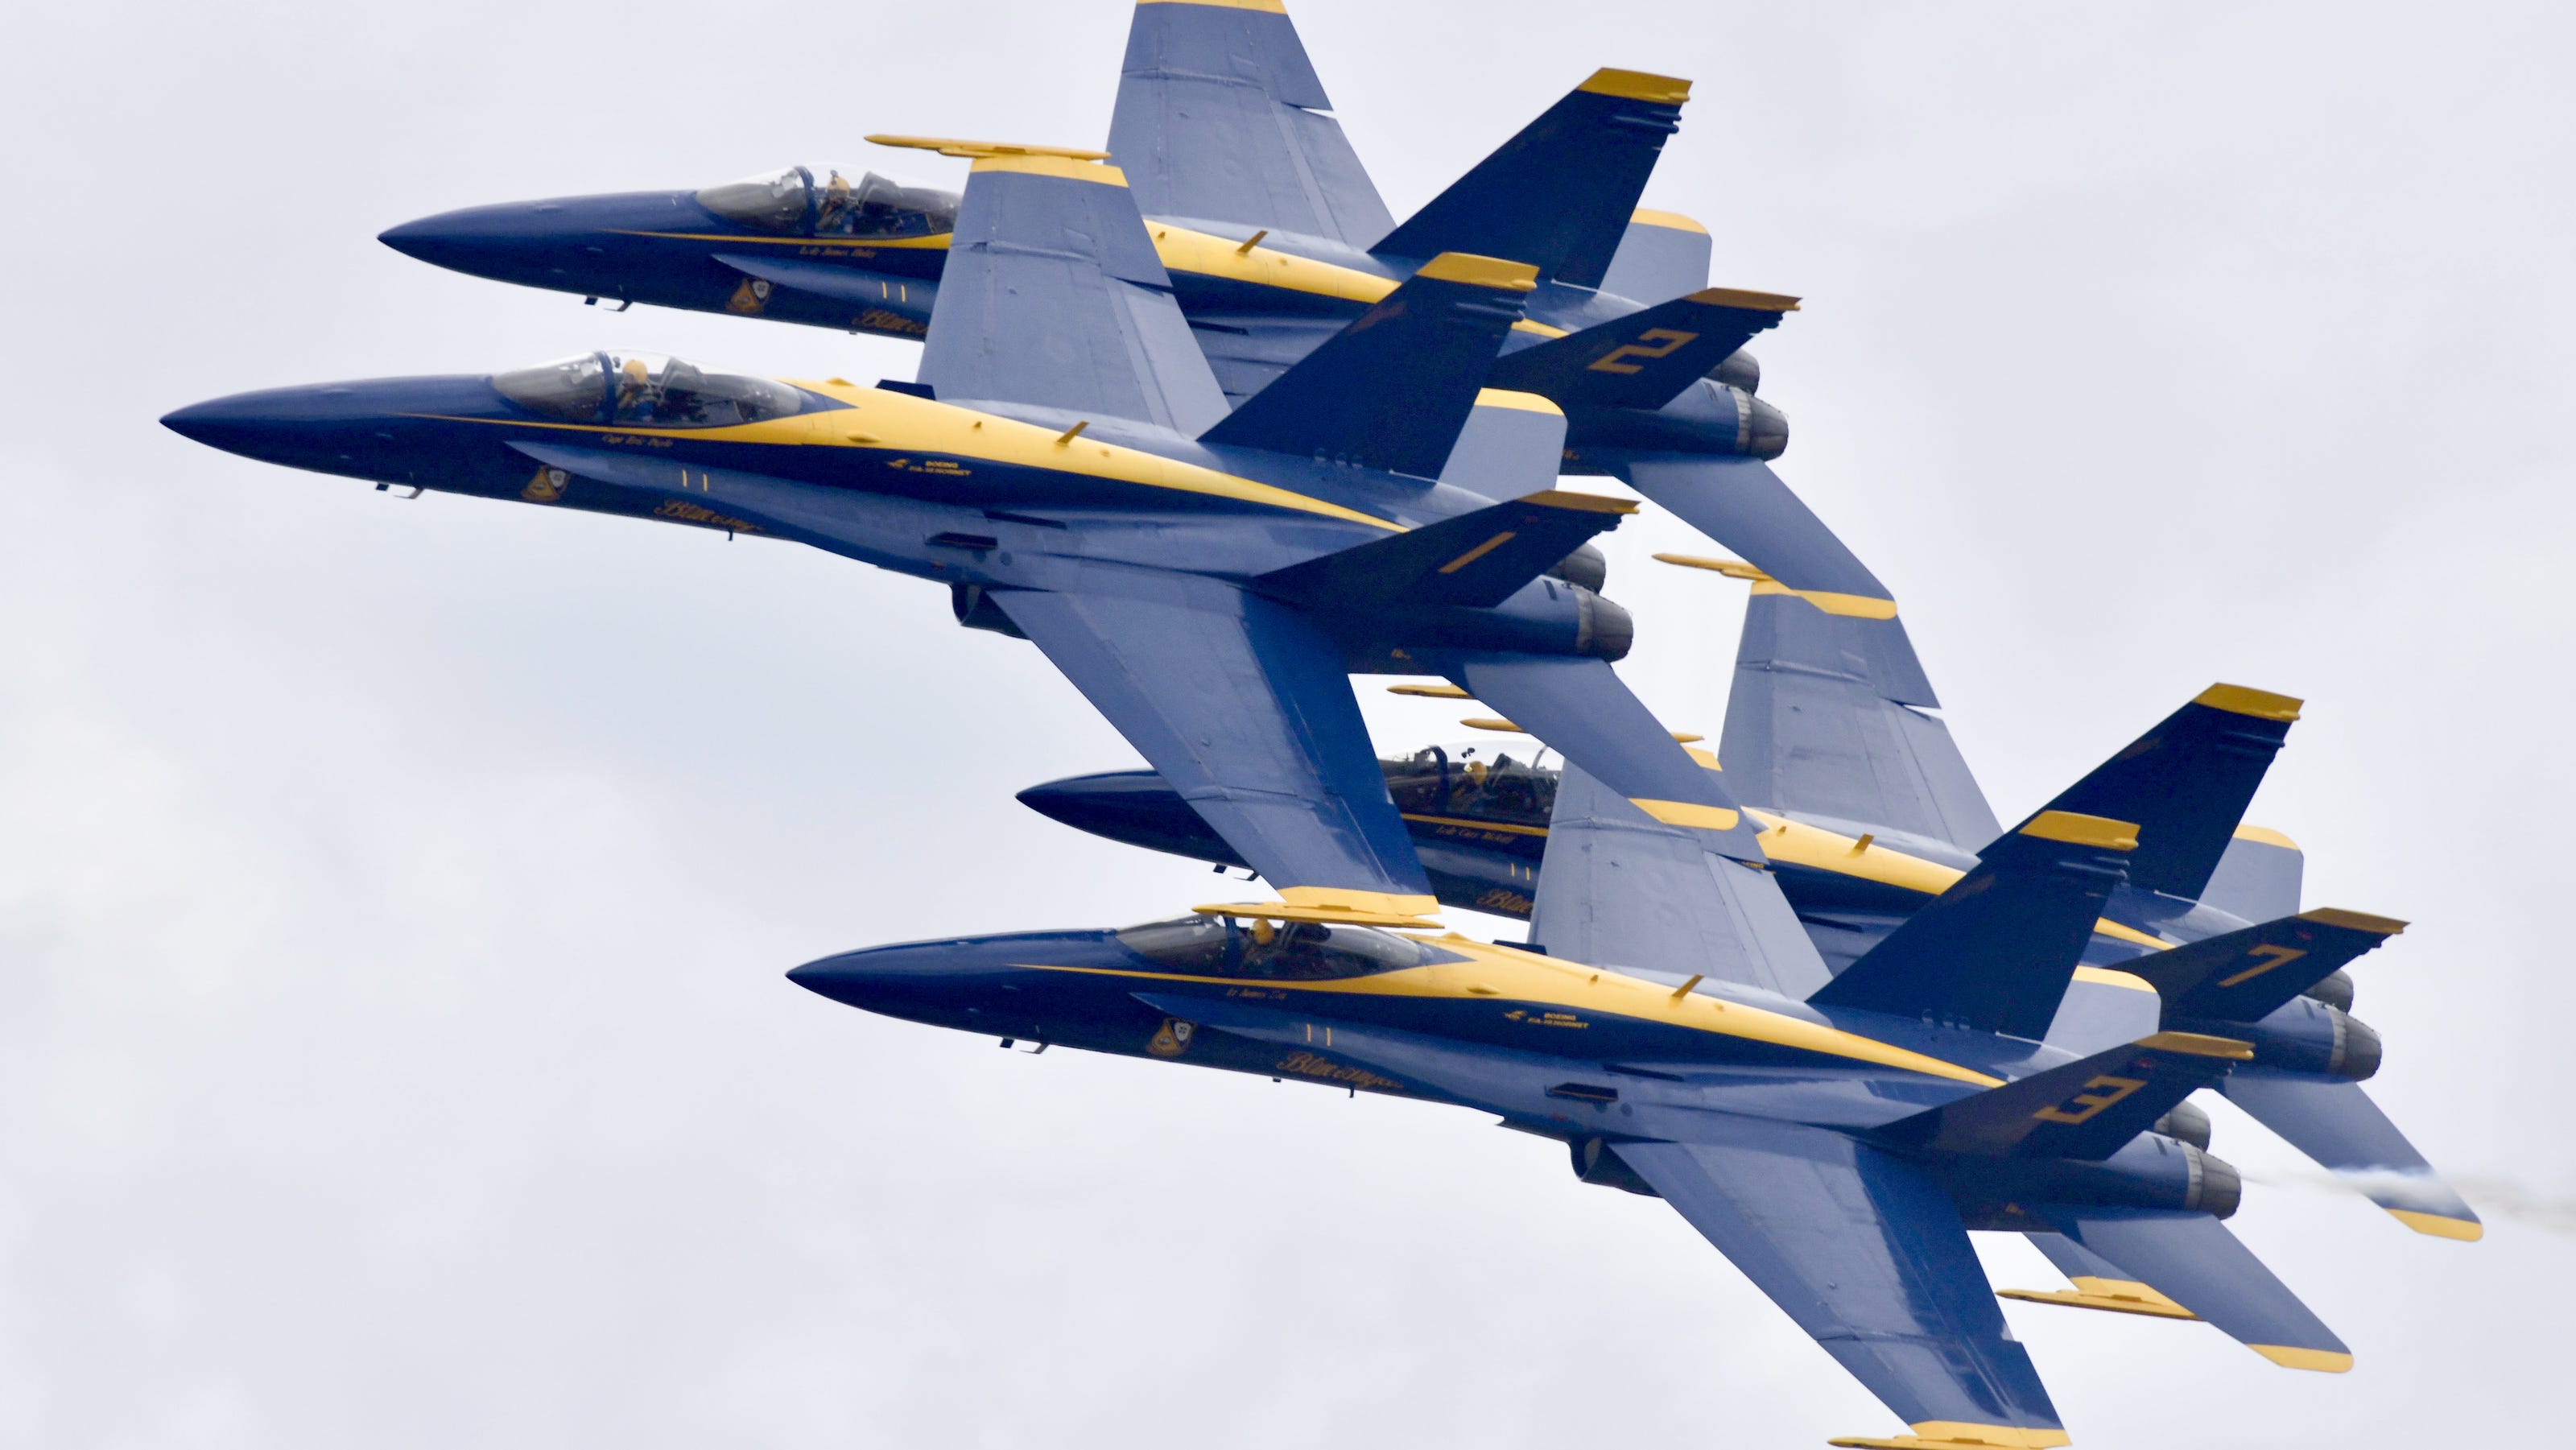 Blue Angels Air Show at Pensacola Beach to take place in July 2020